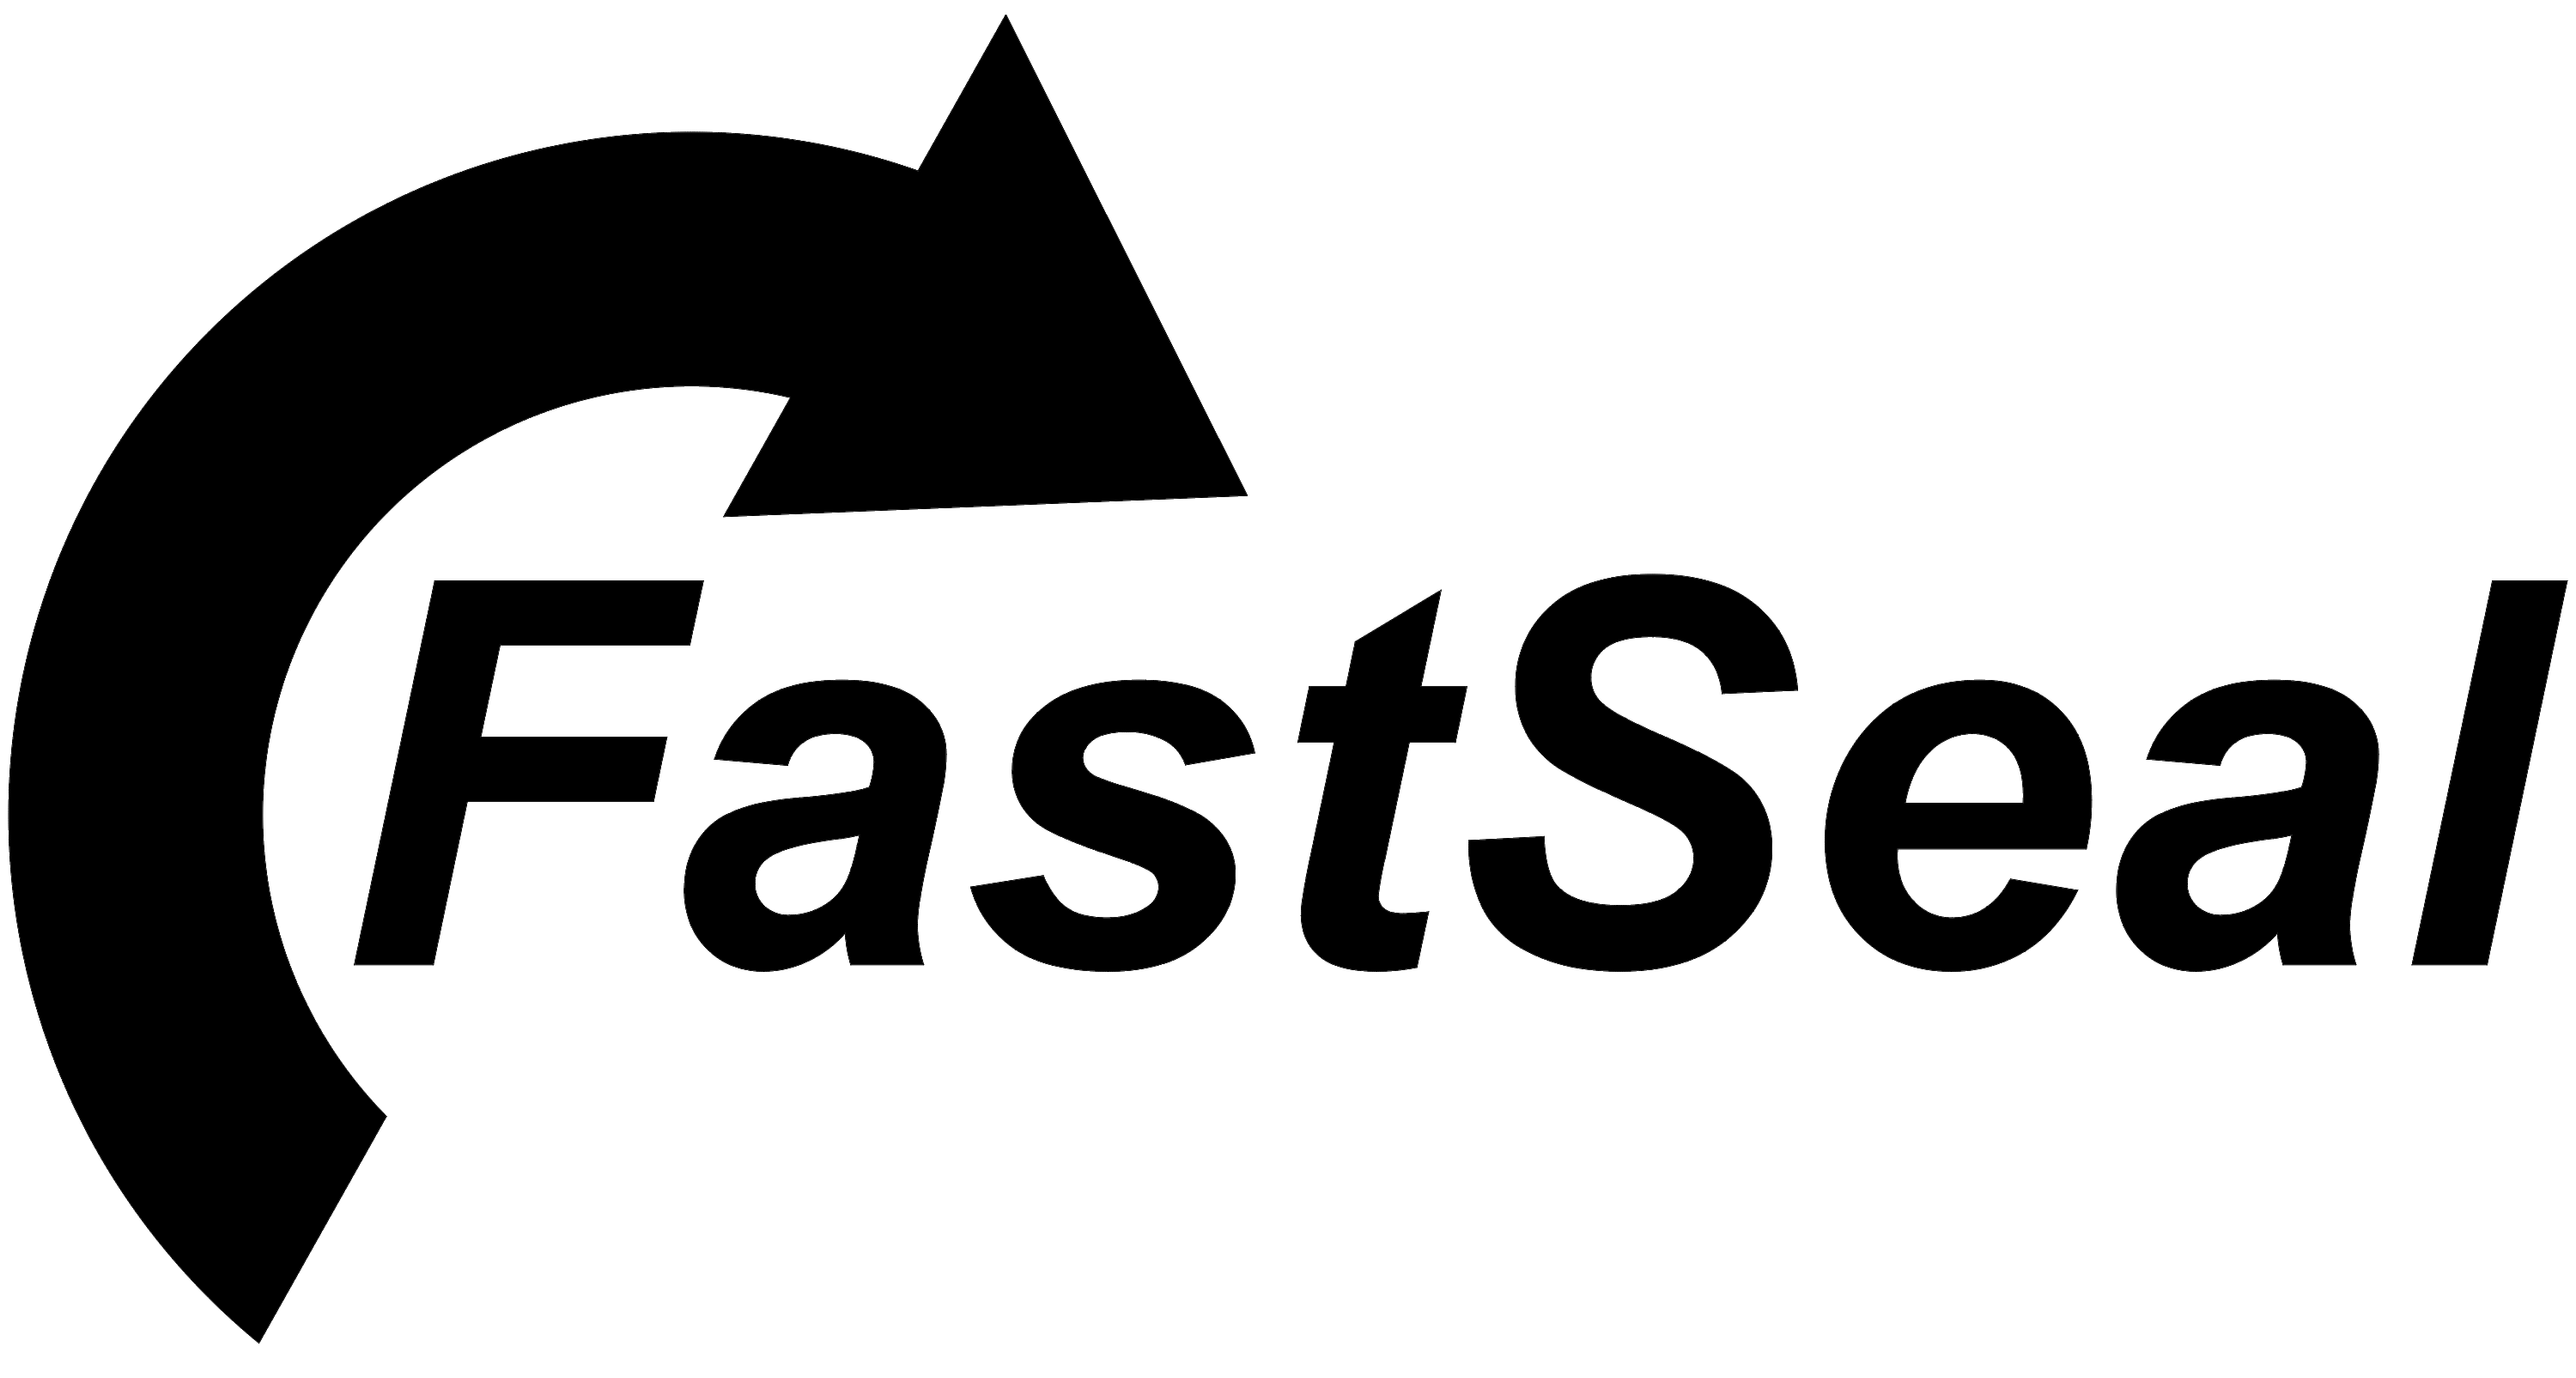 FastSeal knowledge base